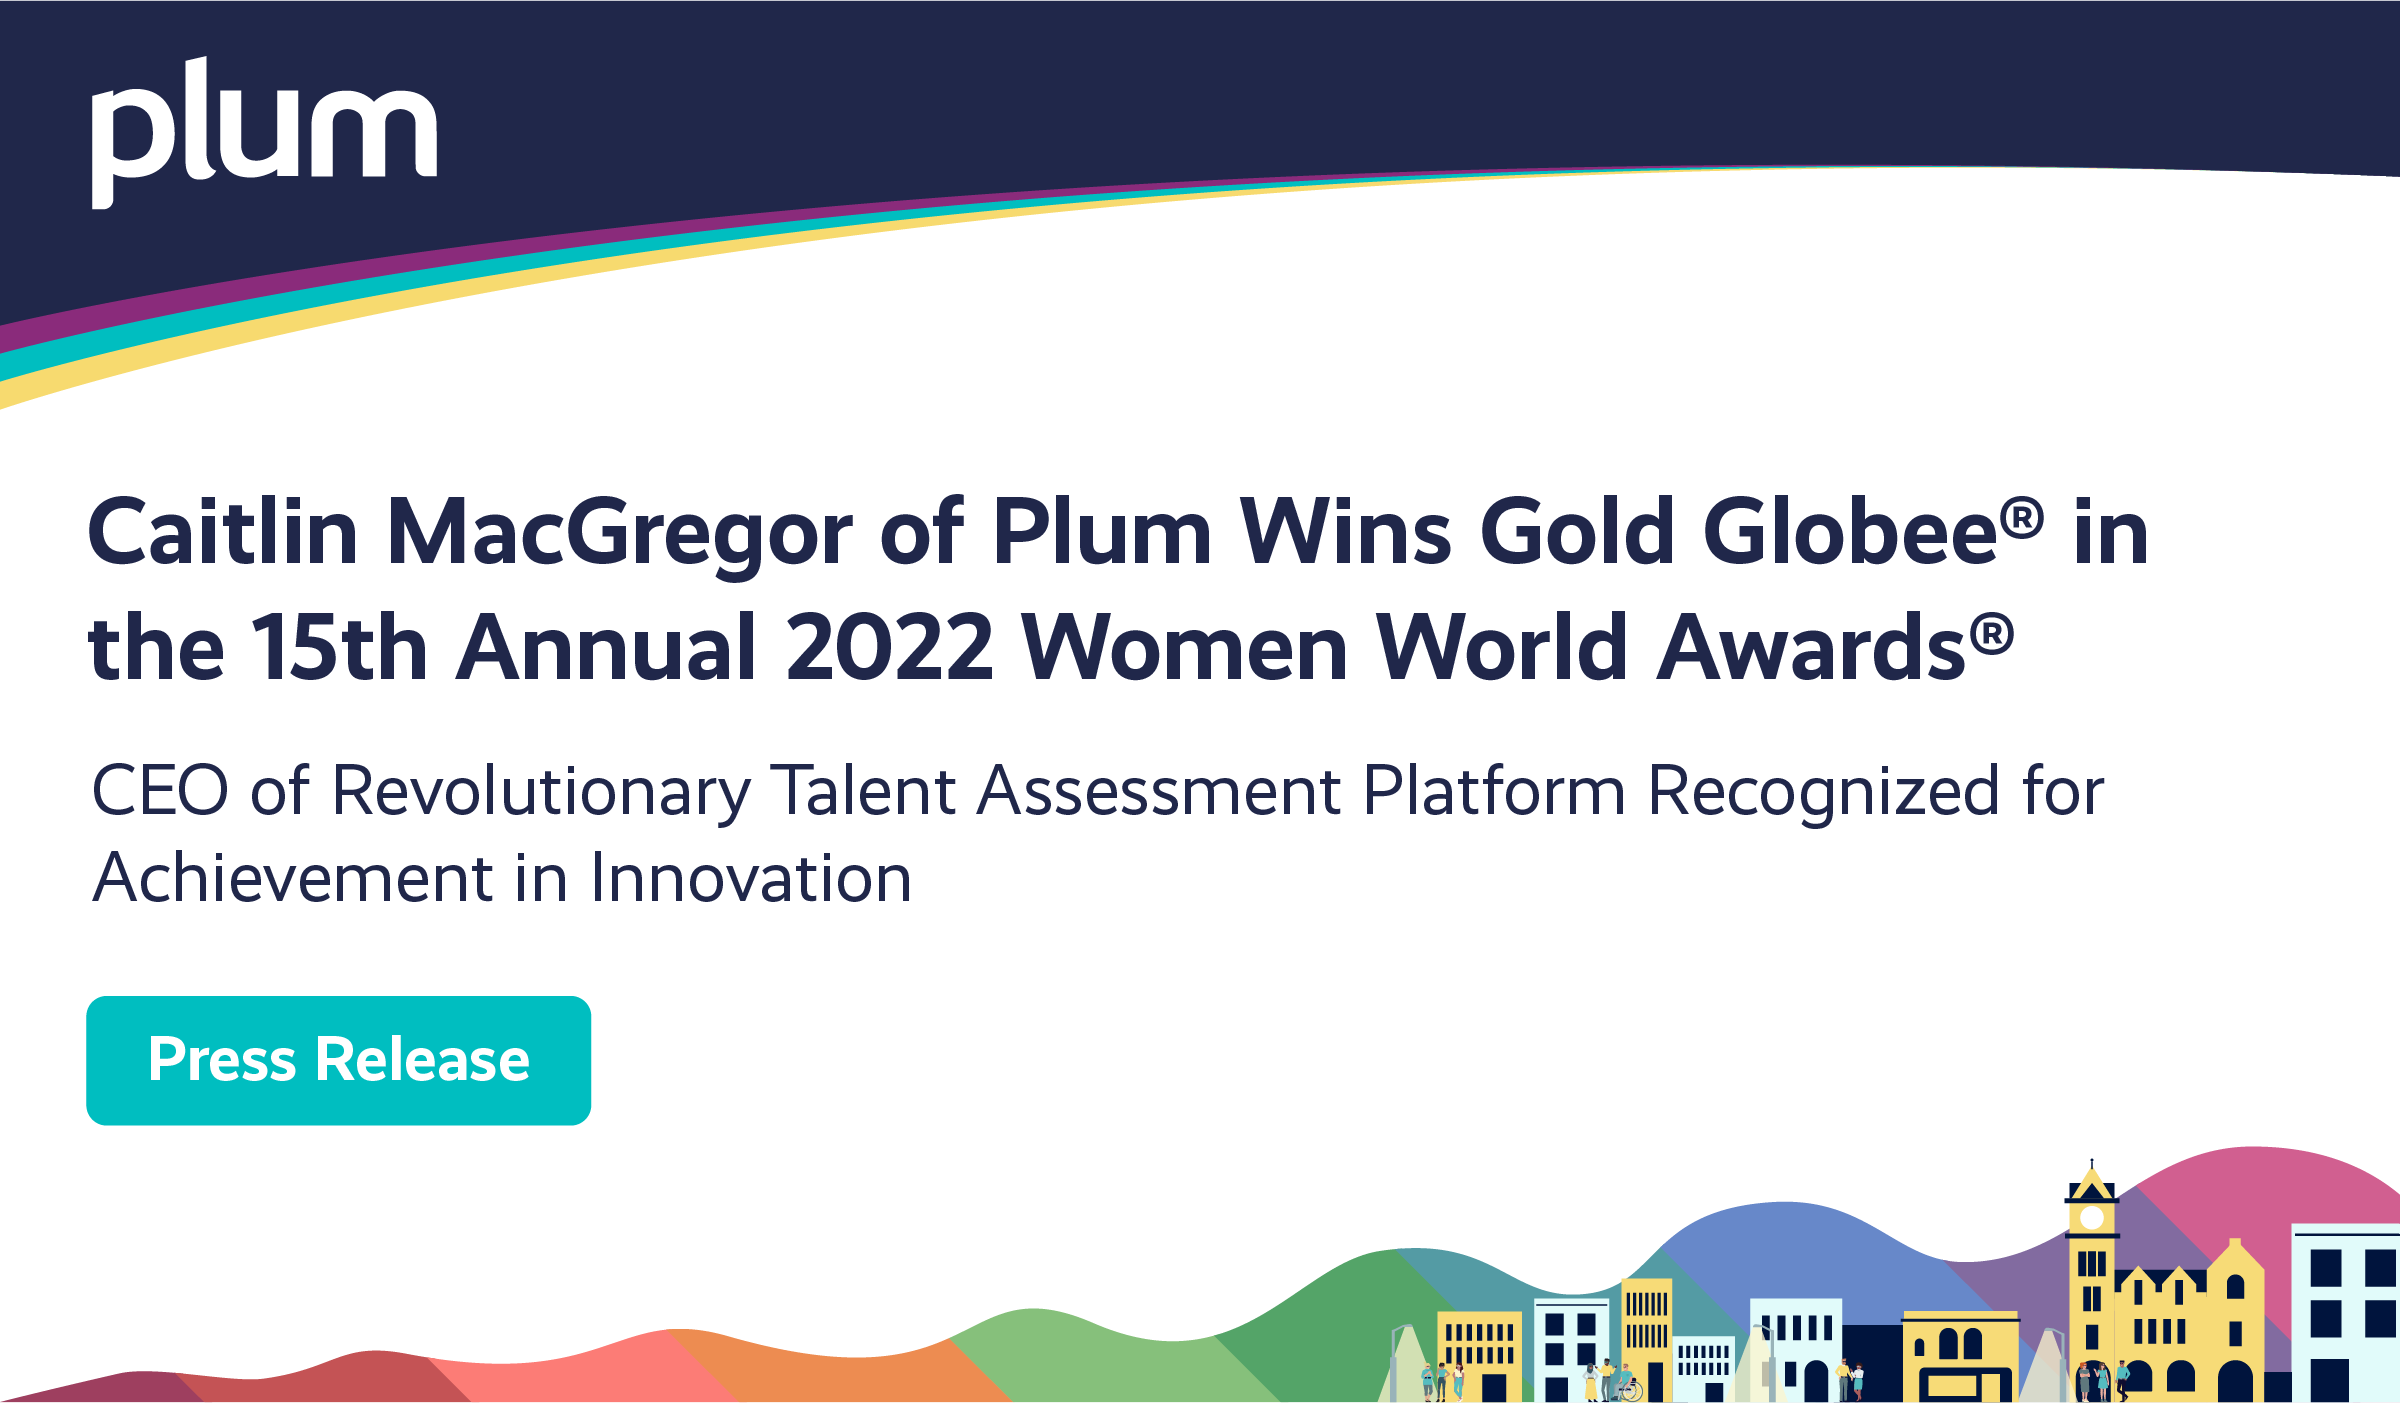 Caitlin MacGregor of Plum Wins Gold Globee in the 15th Annual 2022 Women Worlds Awards